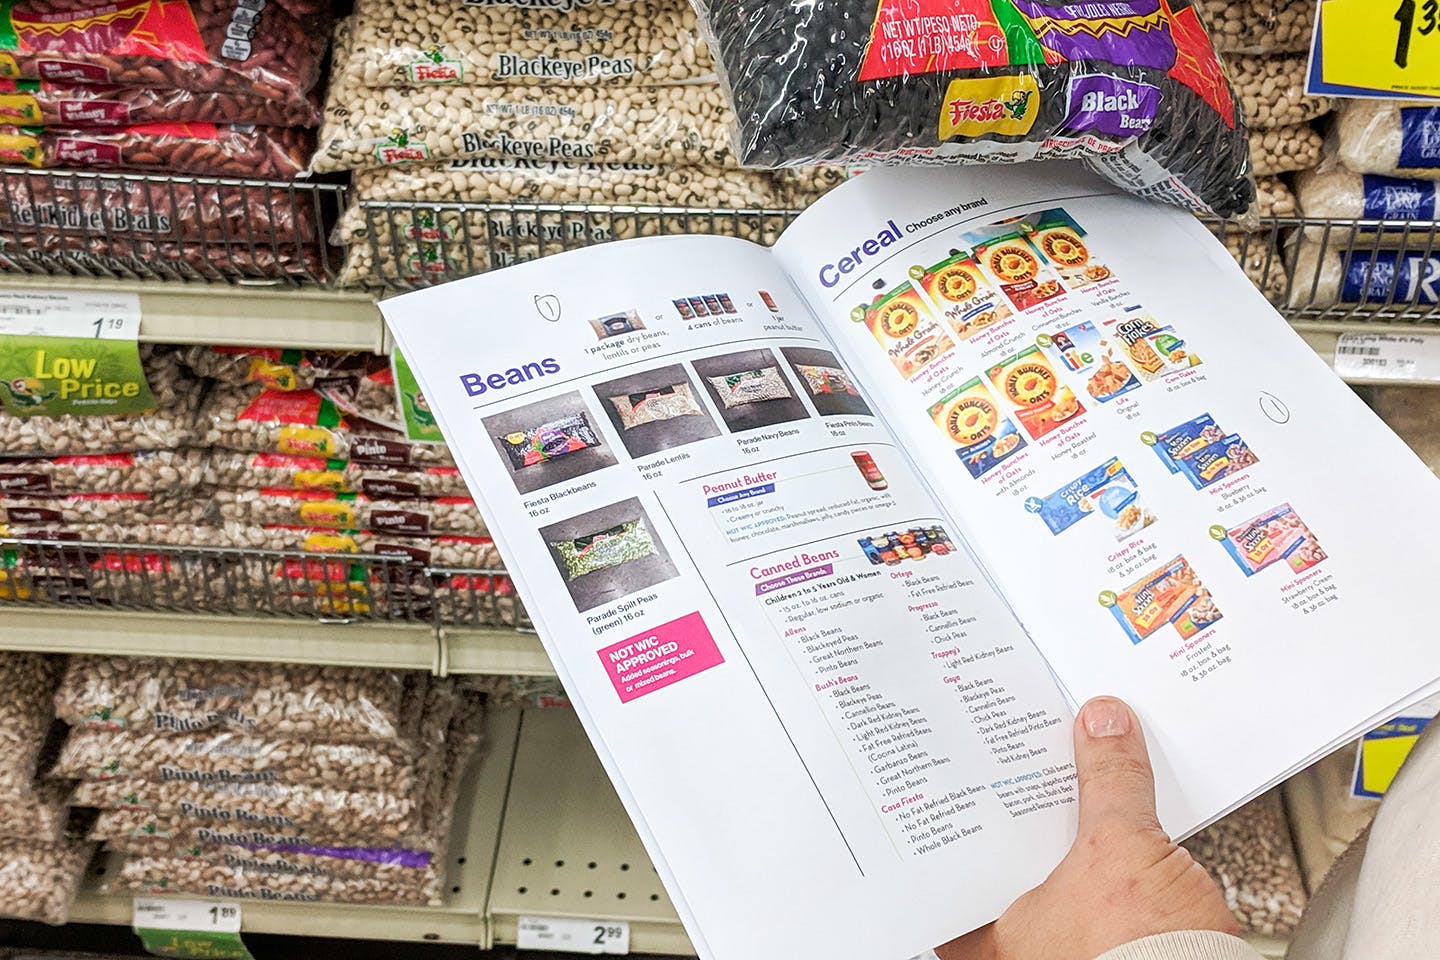 A hand in a grocery store aisle holds an in-store product guide with visuals in front of shelves of beans